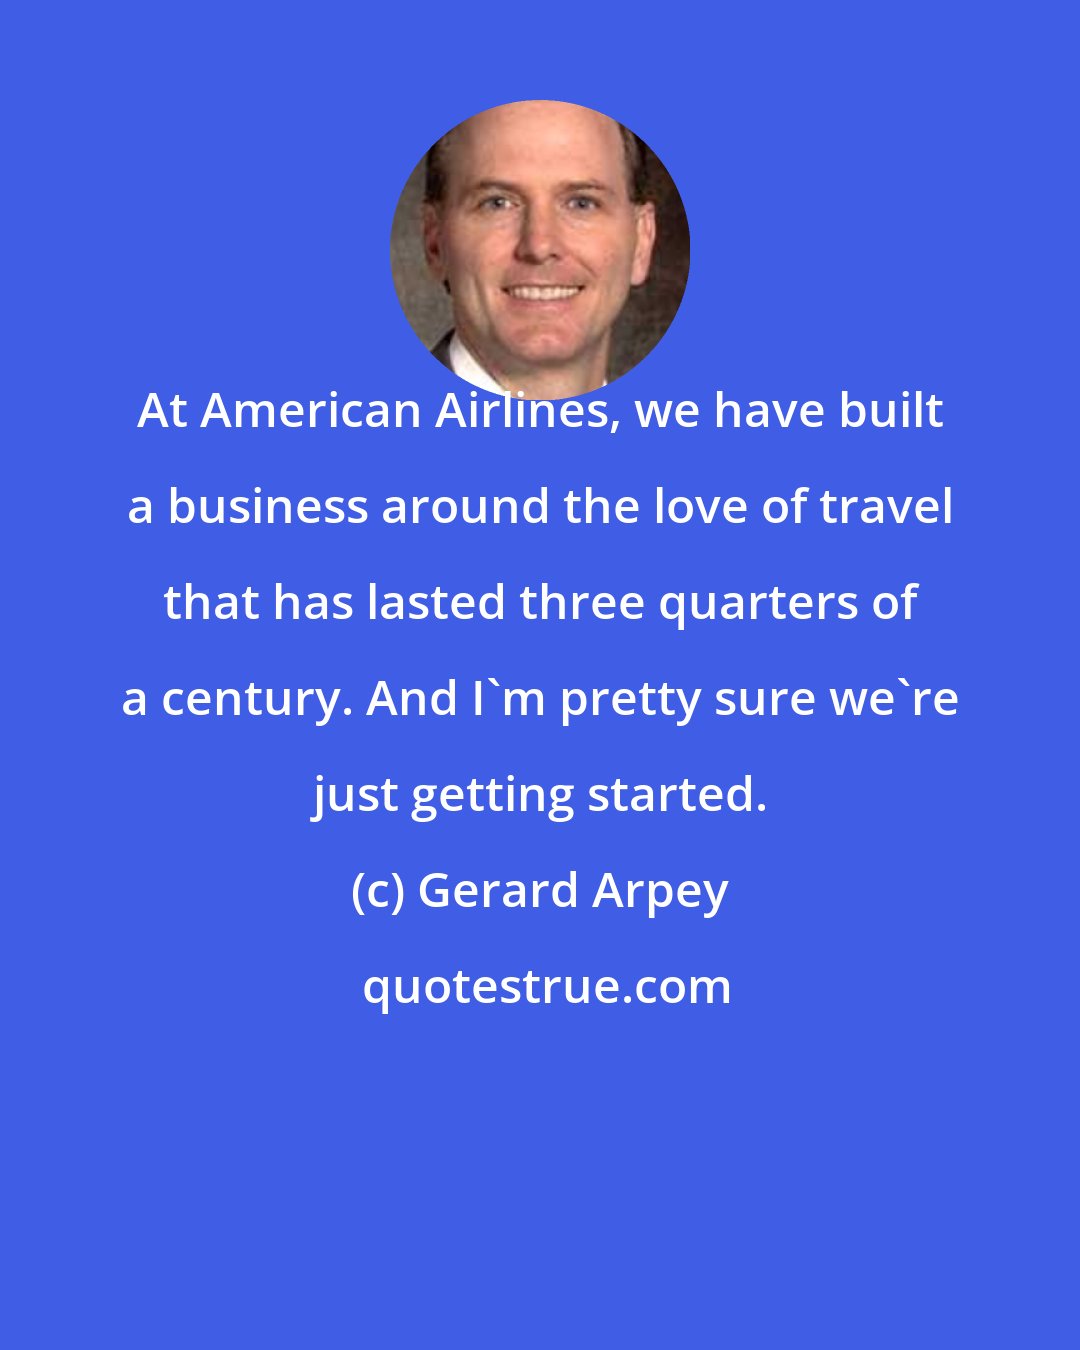 Gerard Arpey: At American Airlines, we have built a business around the love of travel that has lasted three quarters of a century. And I'm pretty sure we're just getting started.